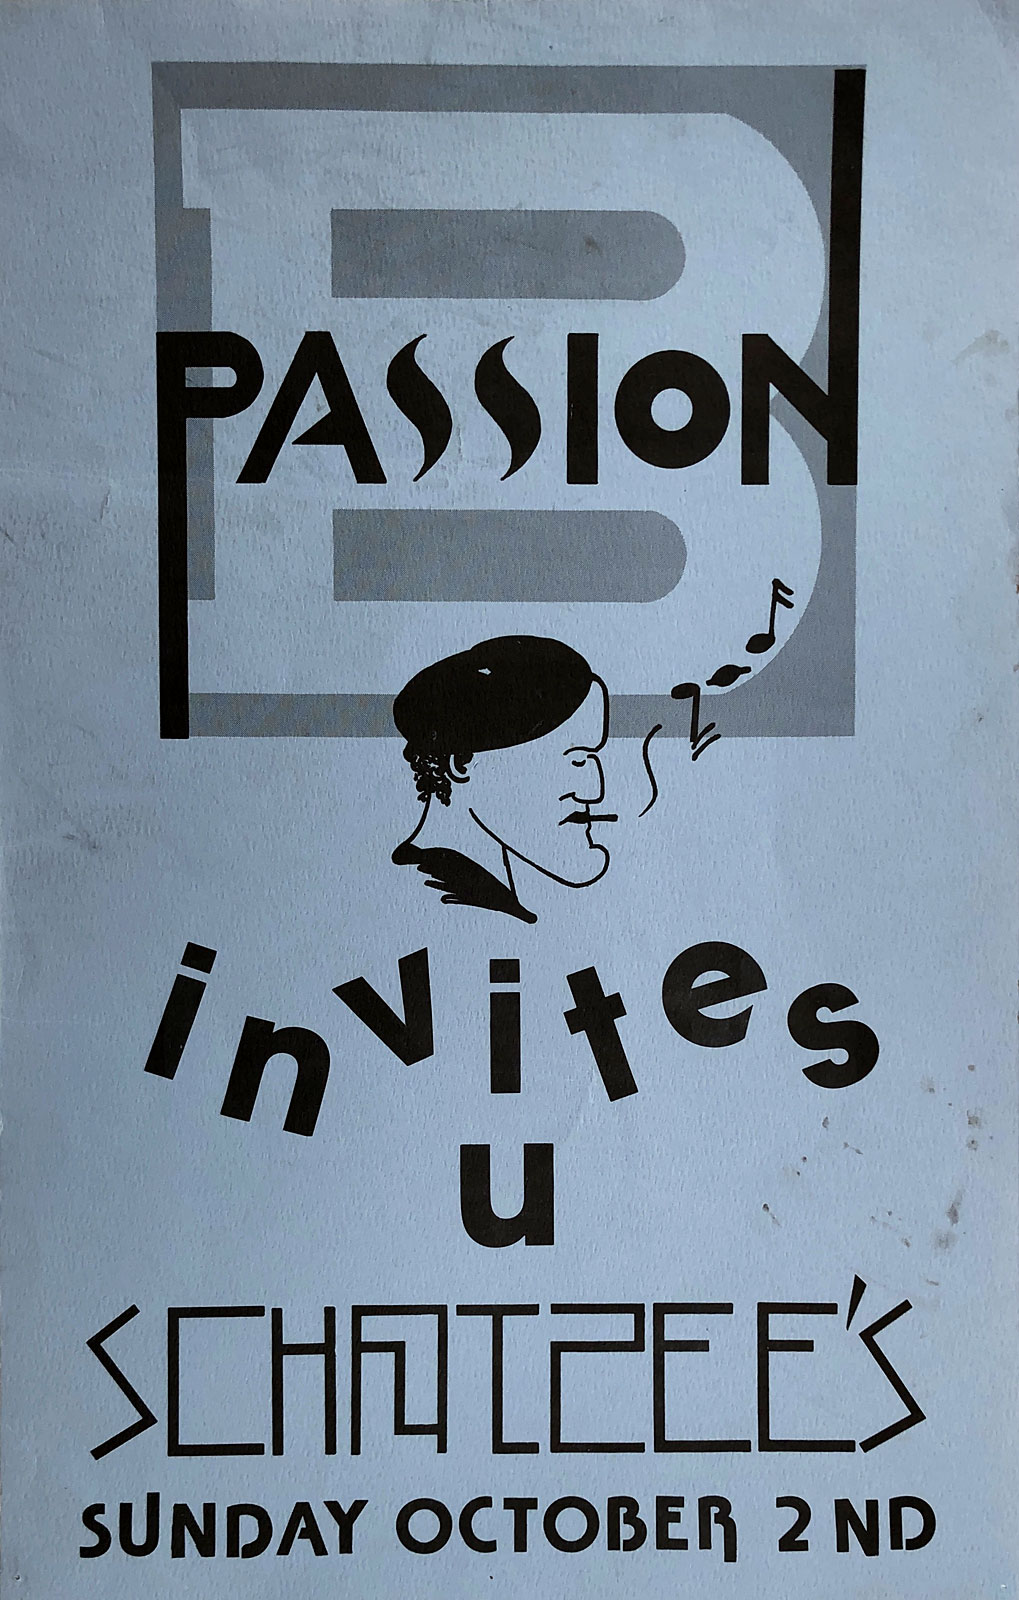 Tim Dodd poster for Passion B performance at Scorgie's in Rochester, New York 10.02.1984